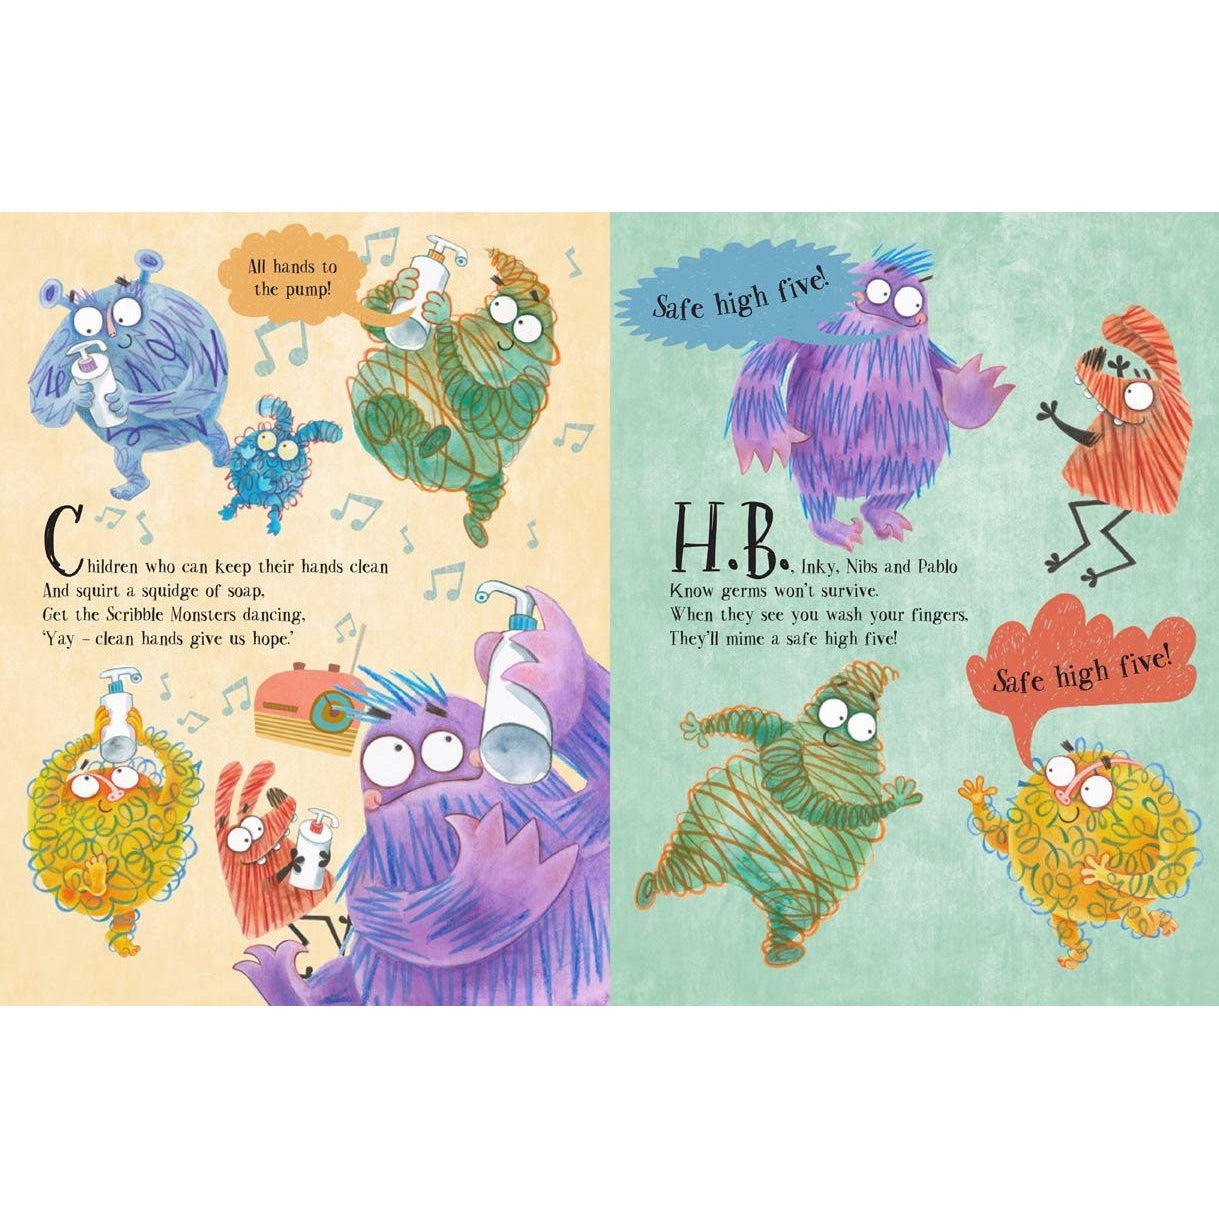 Wash Those Hands! (The Scribble Monsters' Guide To Modern Manners) - John Townsend & Carolyn Scrace